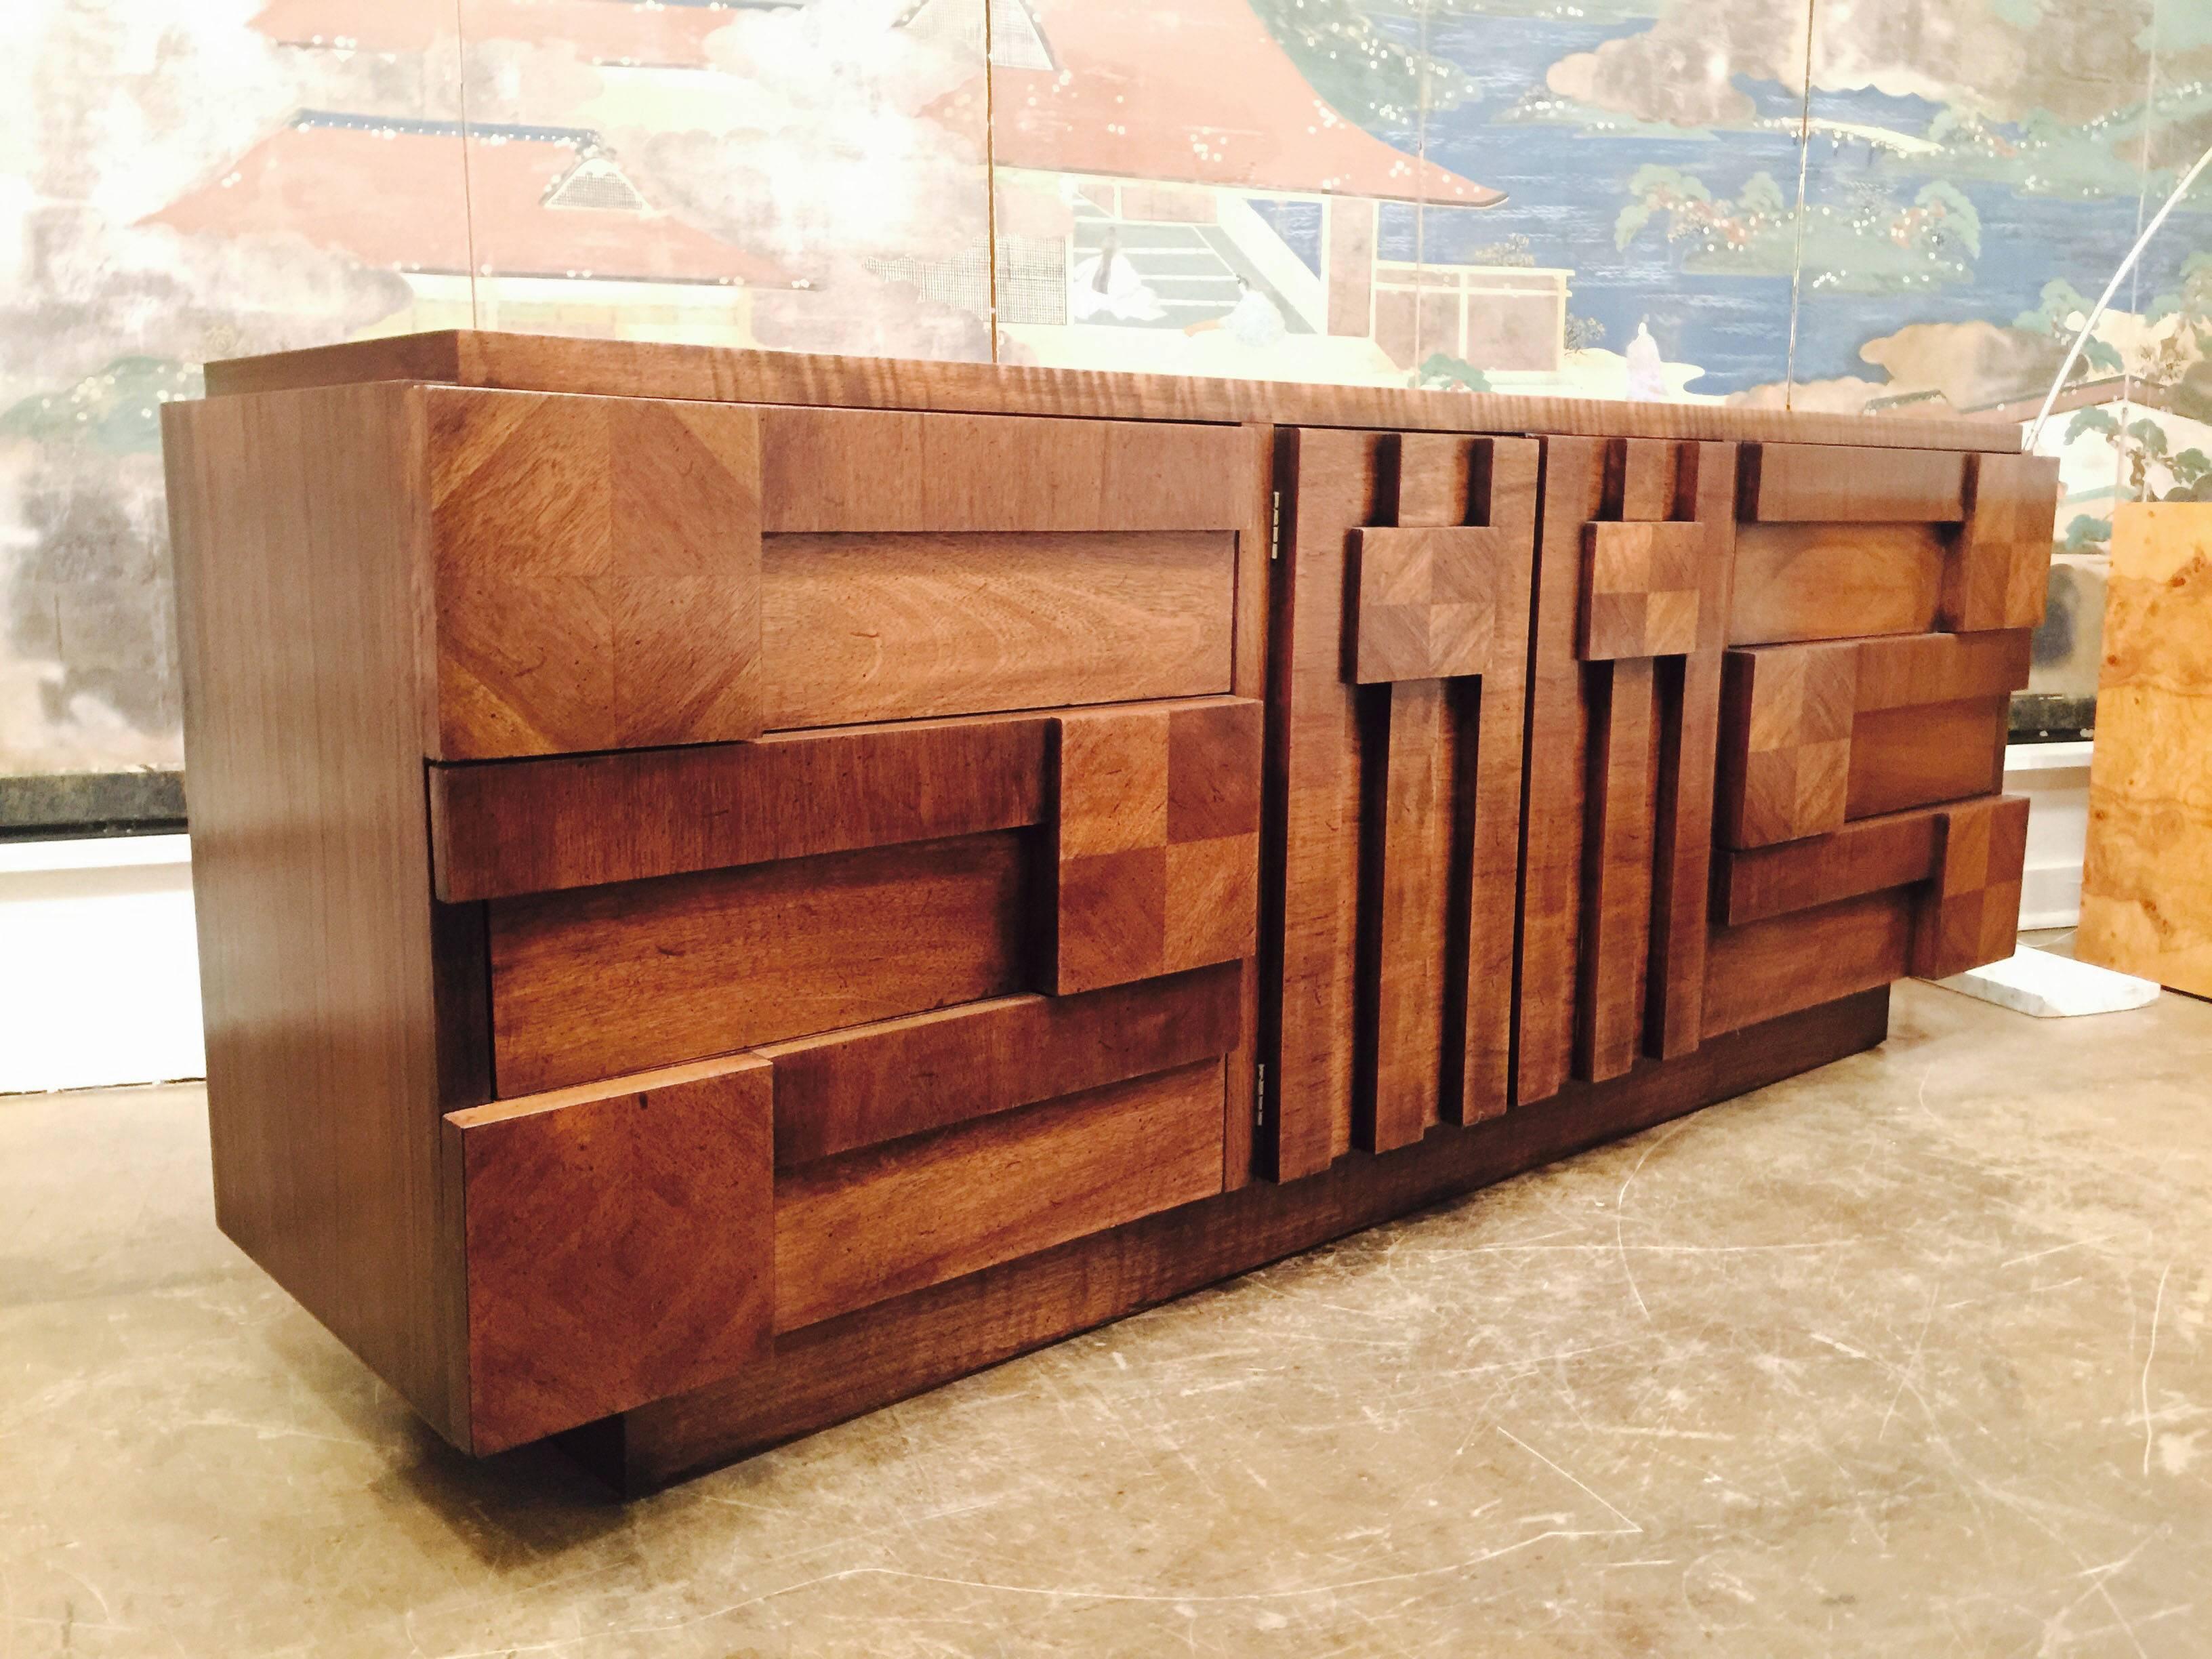 Brutalist dresser or credenza by Lane Furniture. Piece is in excellent condition with minimal wear, circa 1970s

Dimensions: 78